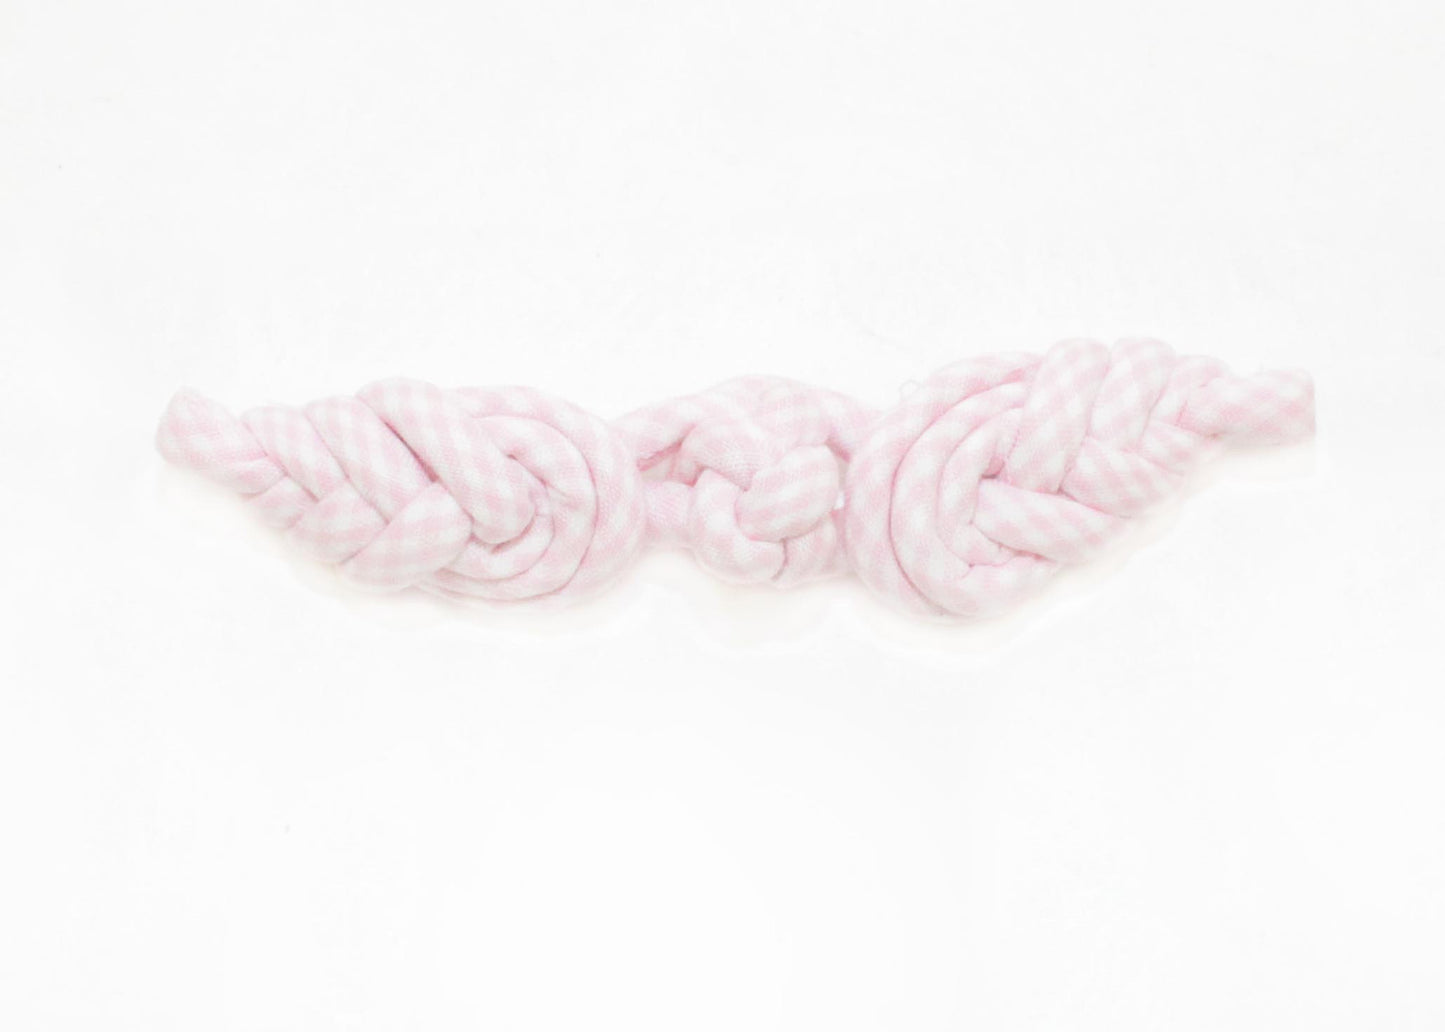 4" Plaid Pineapple Frog Knot  - 10 sets